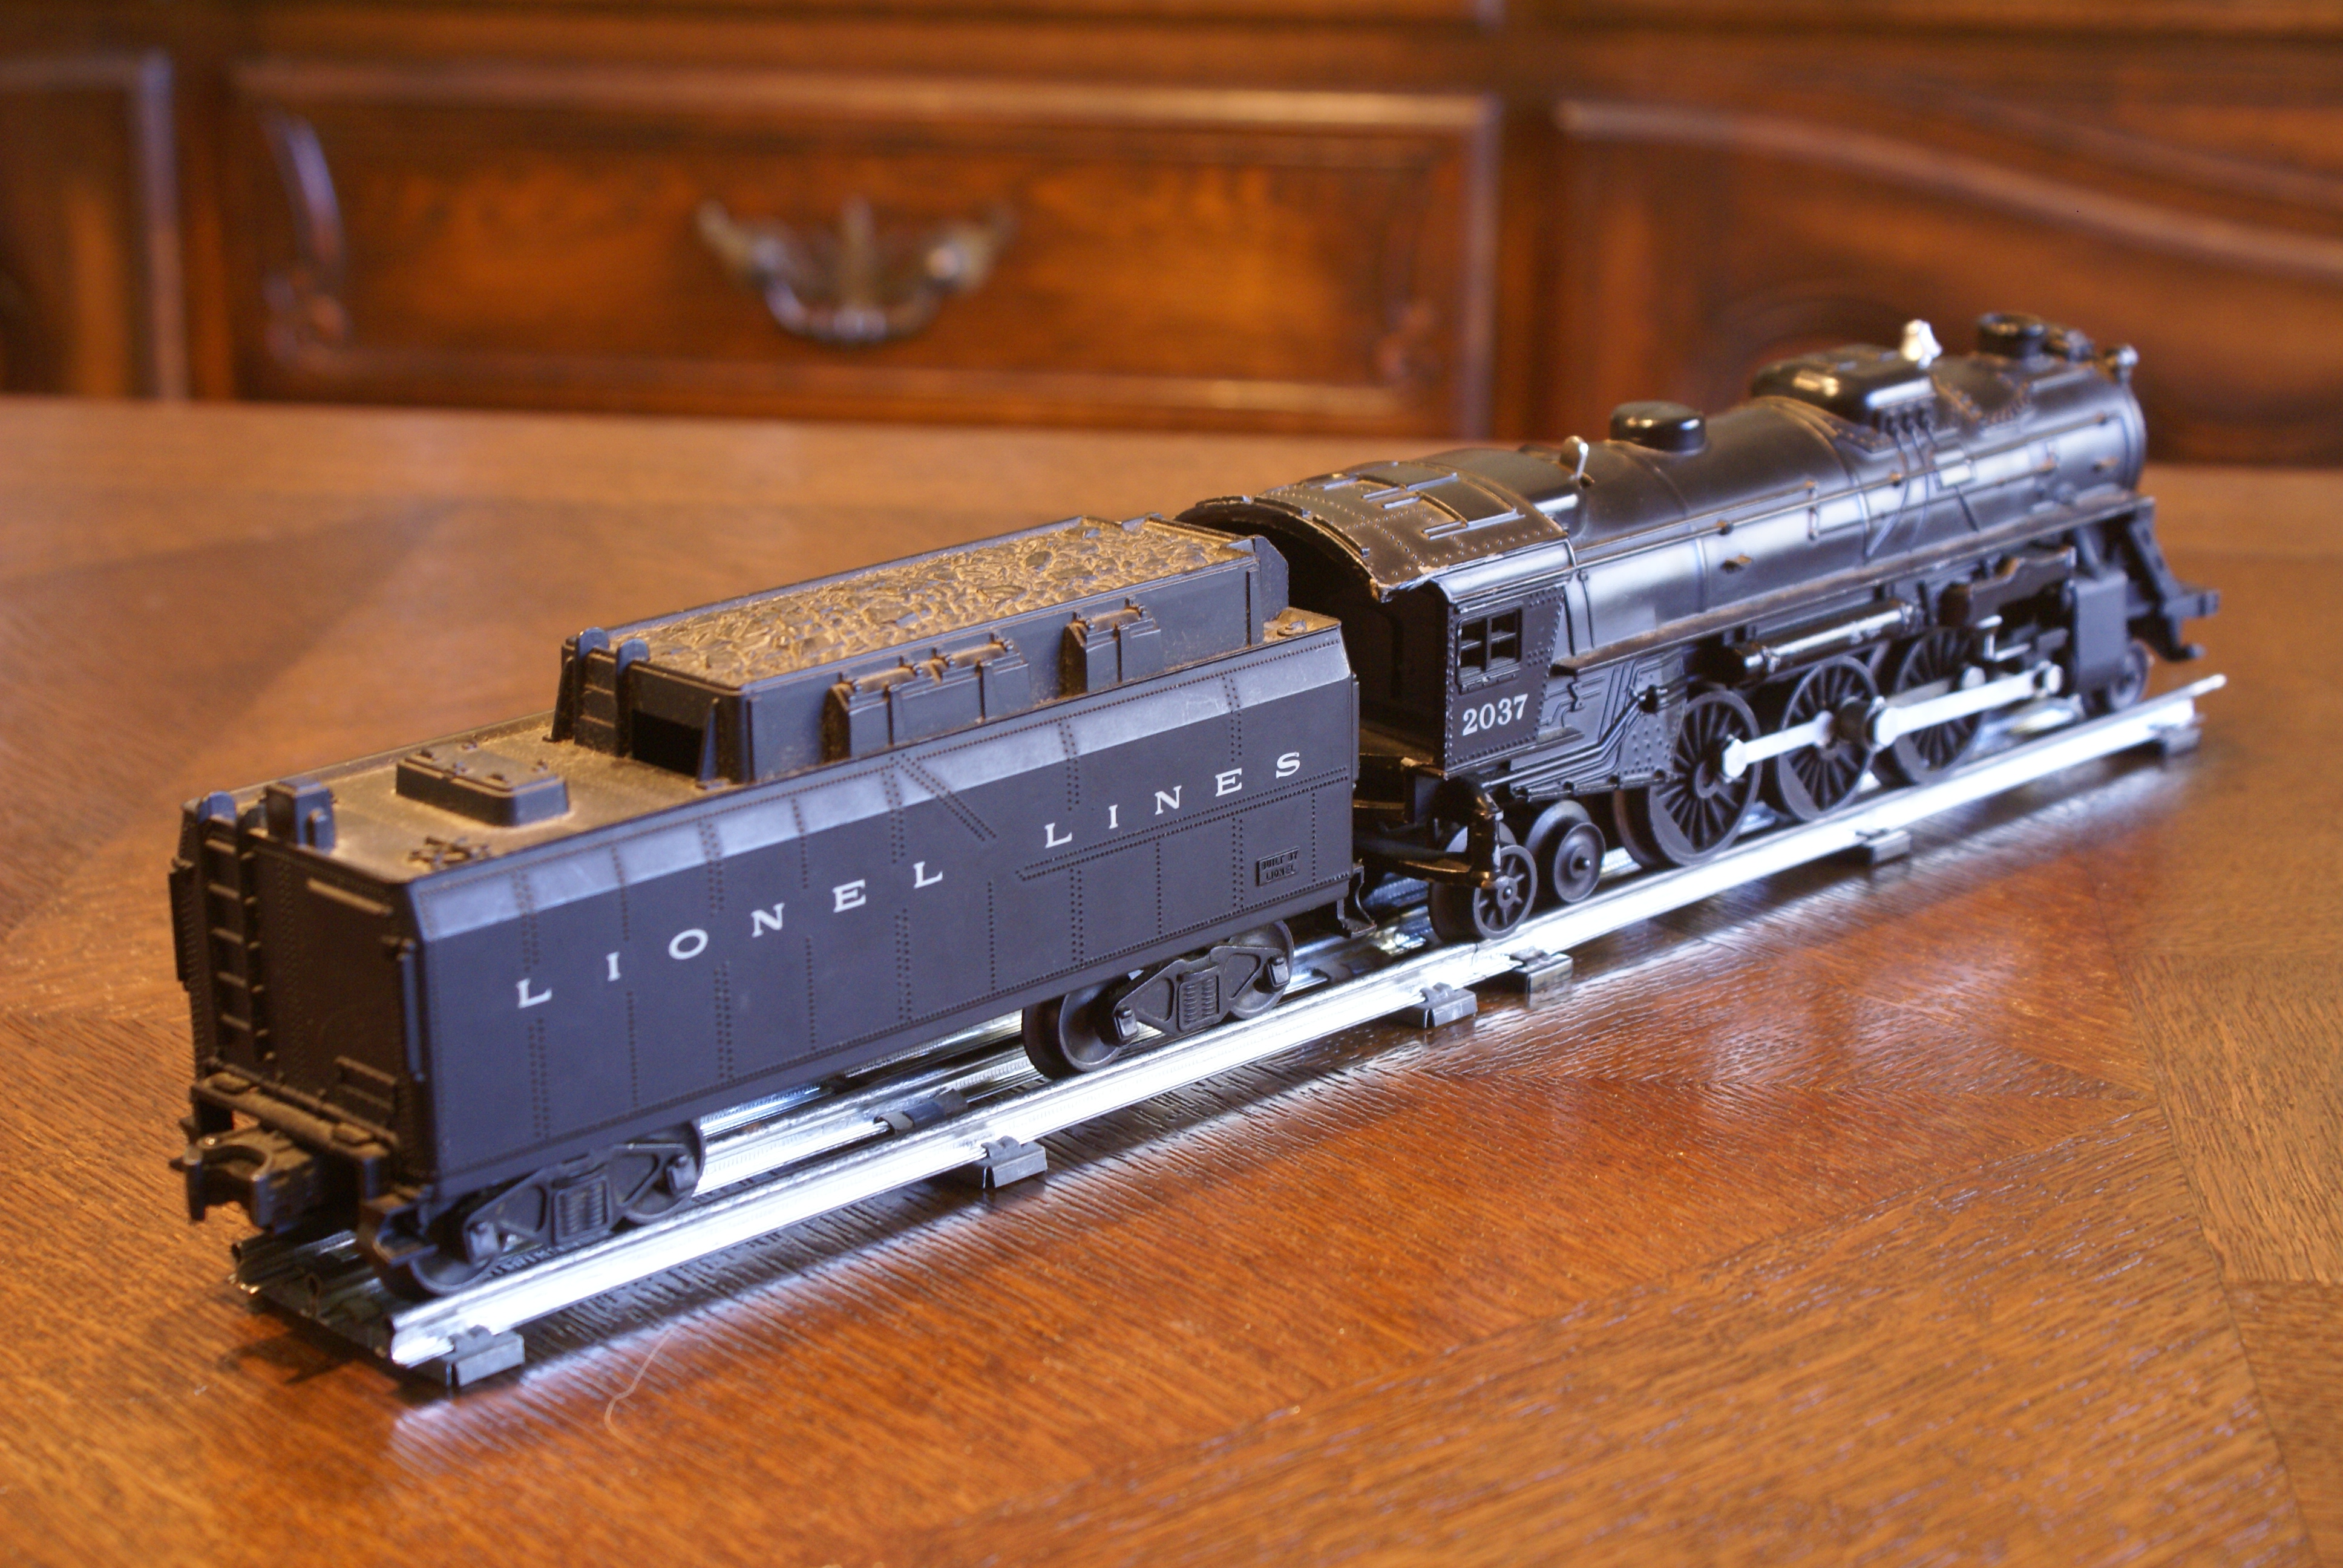  Lionel Black Steam Engine and Tender O27 Scale Electric Model Train